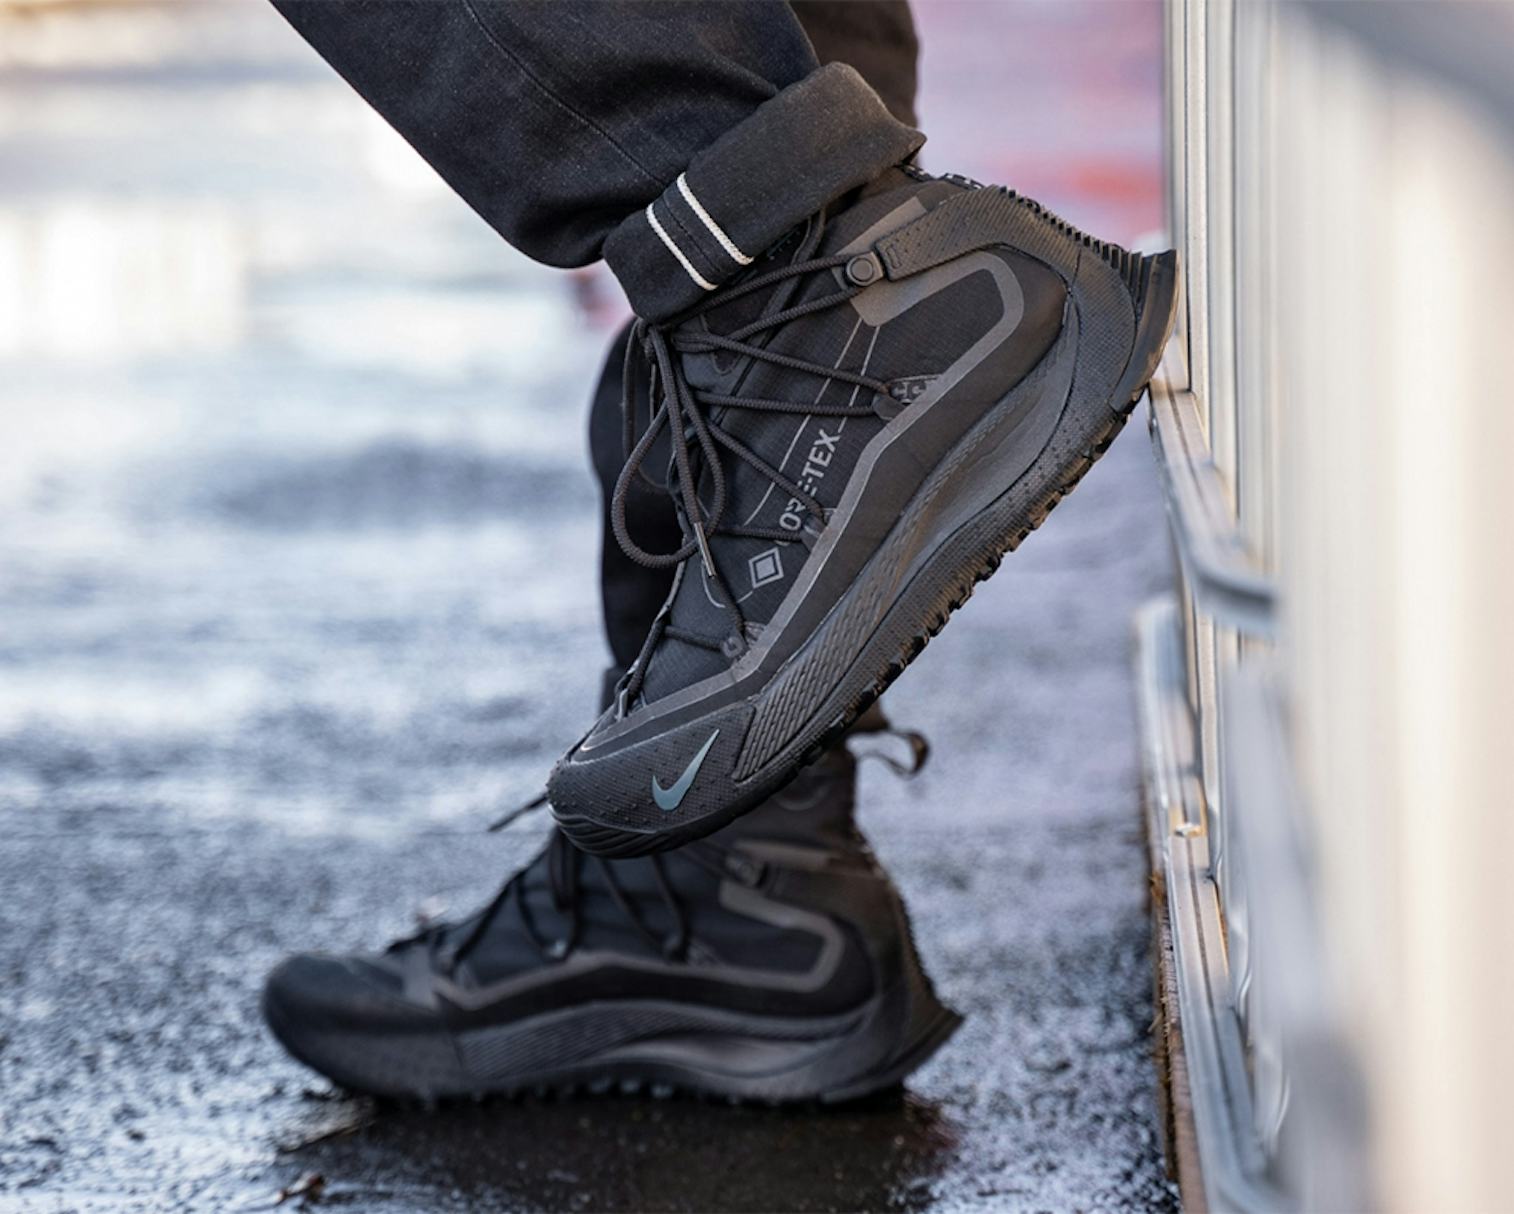 Nike ACG drops a new sneaker boot to drool over